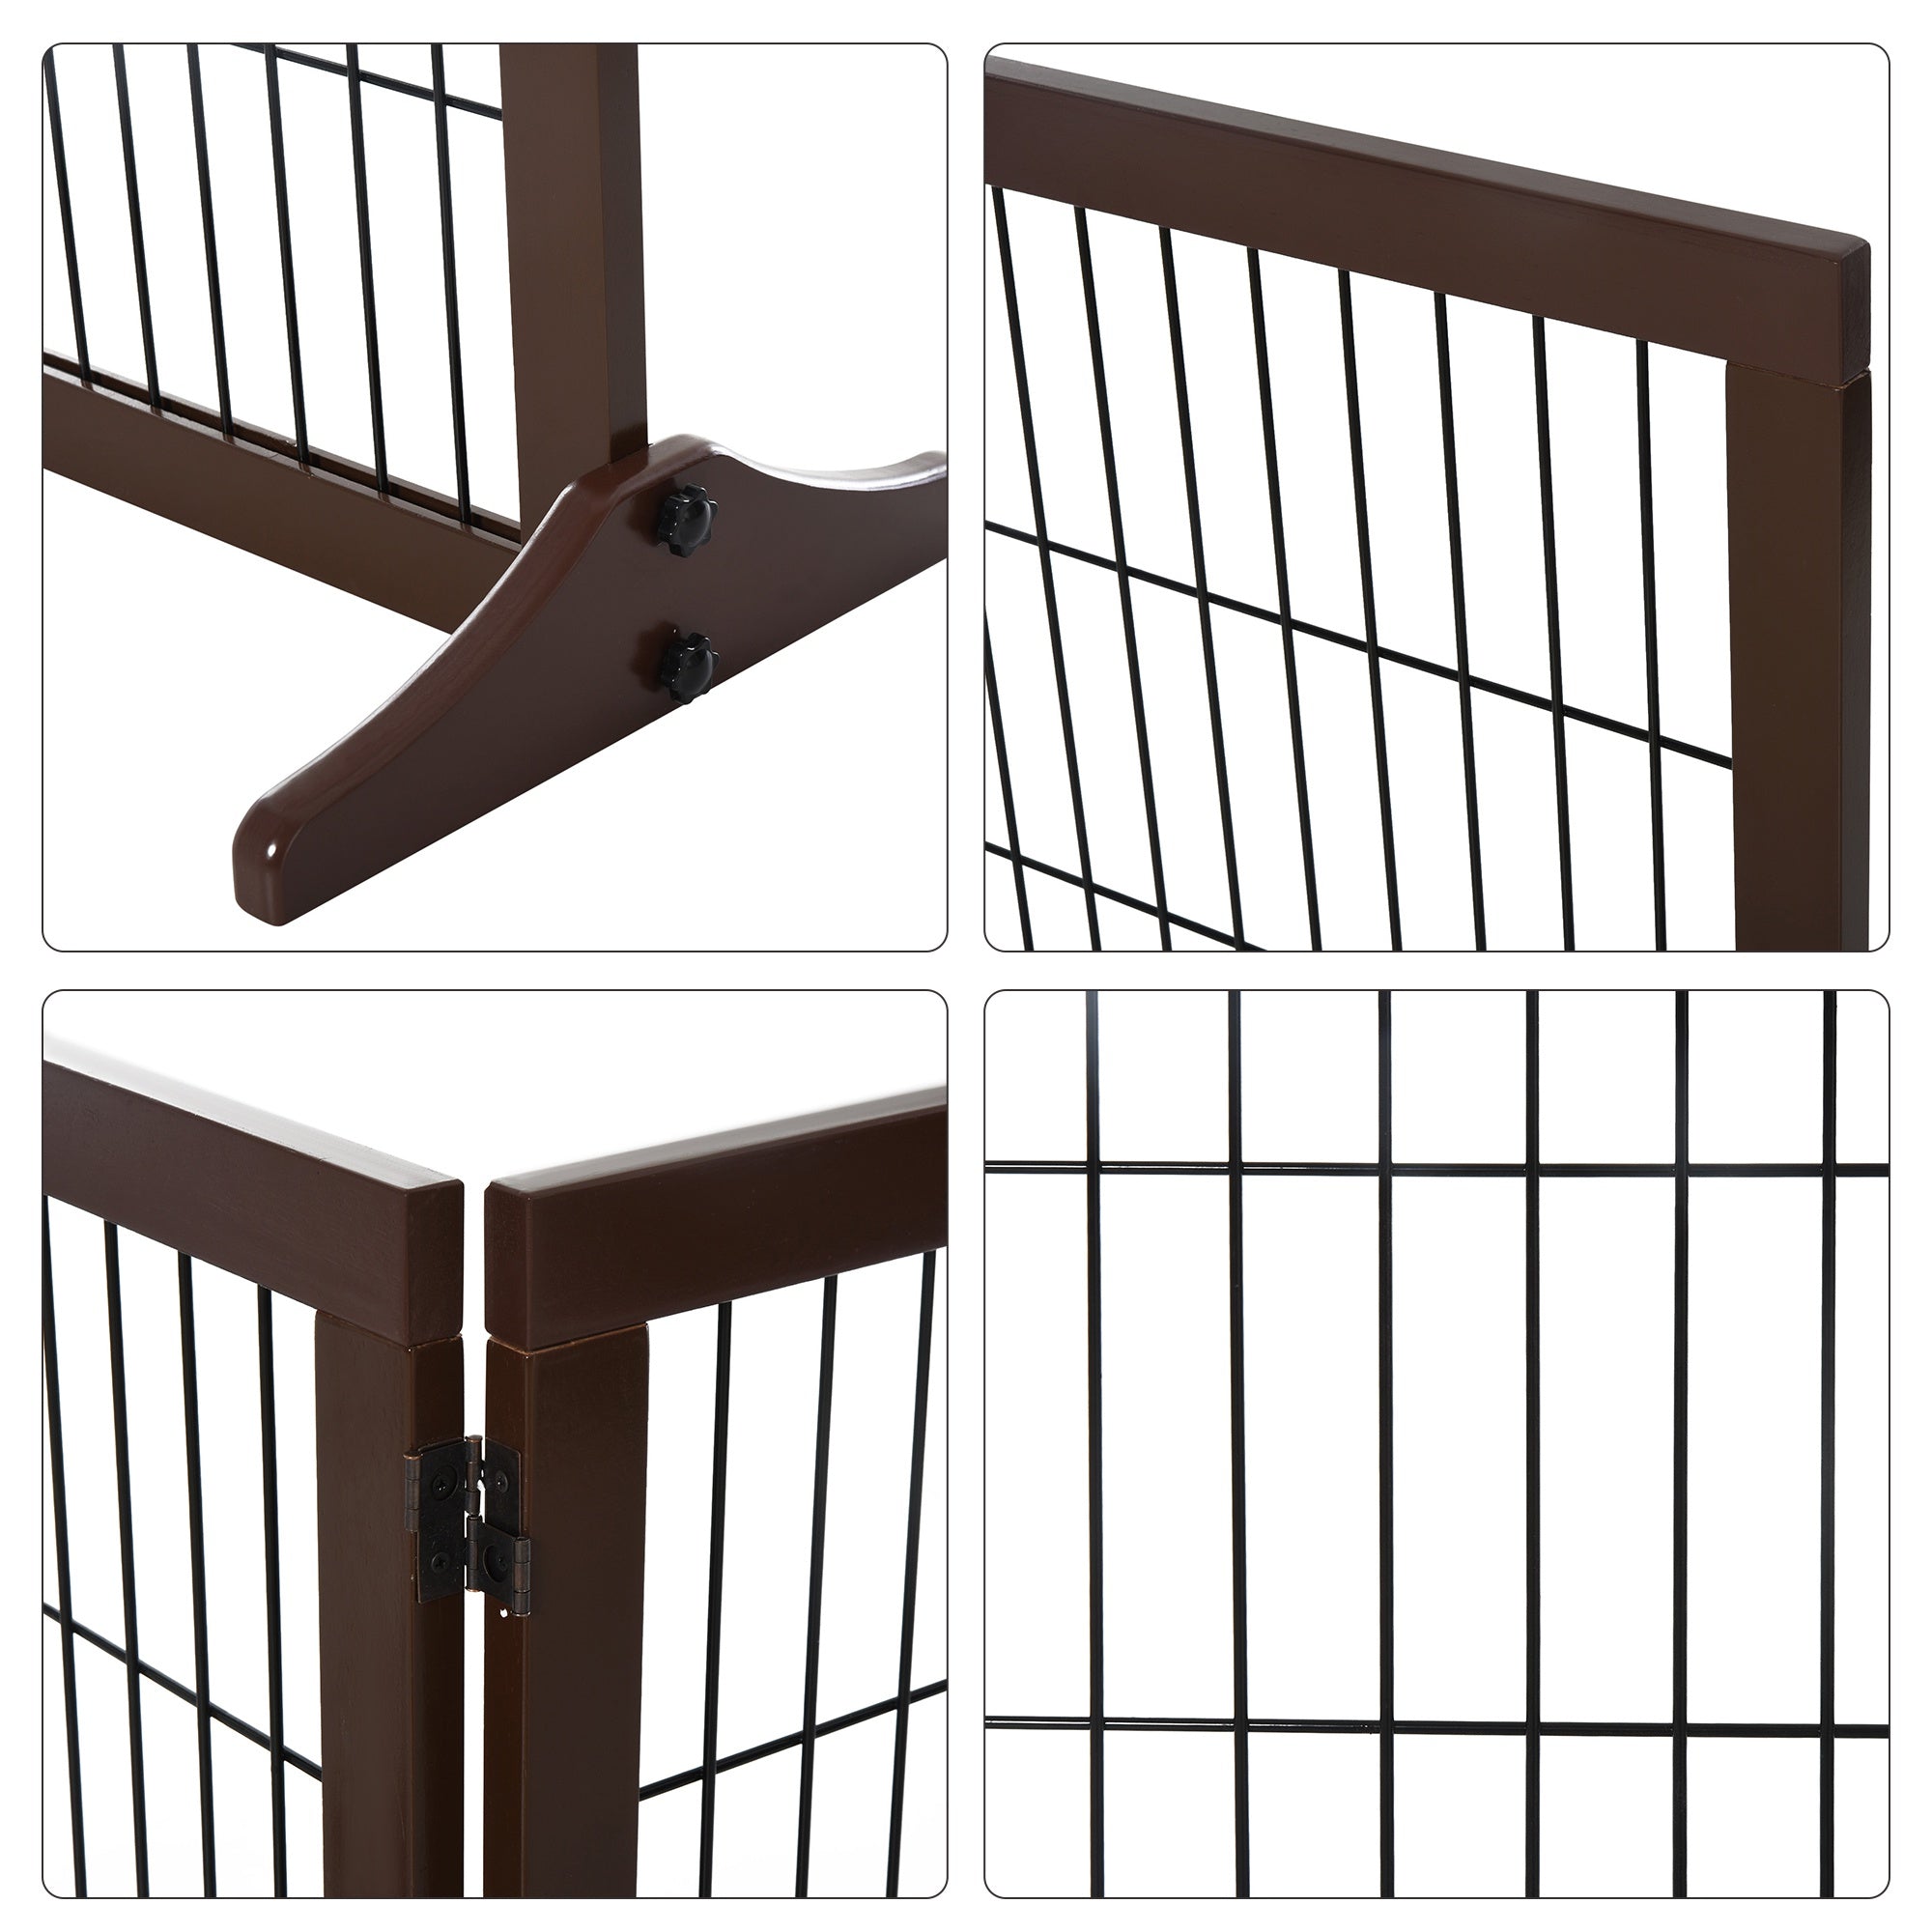 3 Panel Pet Gate Pine Frame Indoor Foldable Dog Barrier w/Supporting Foot, Brown